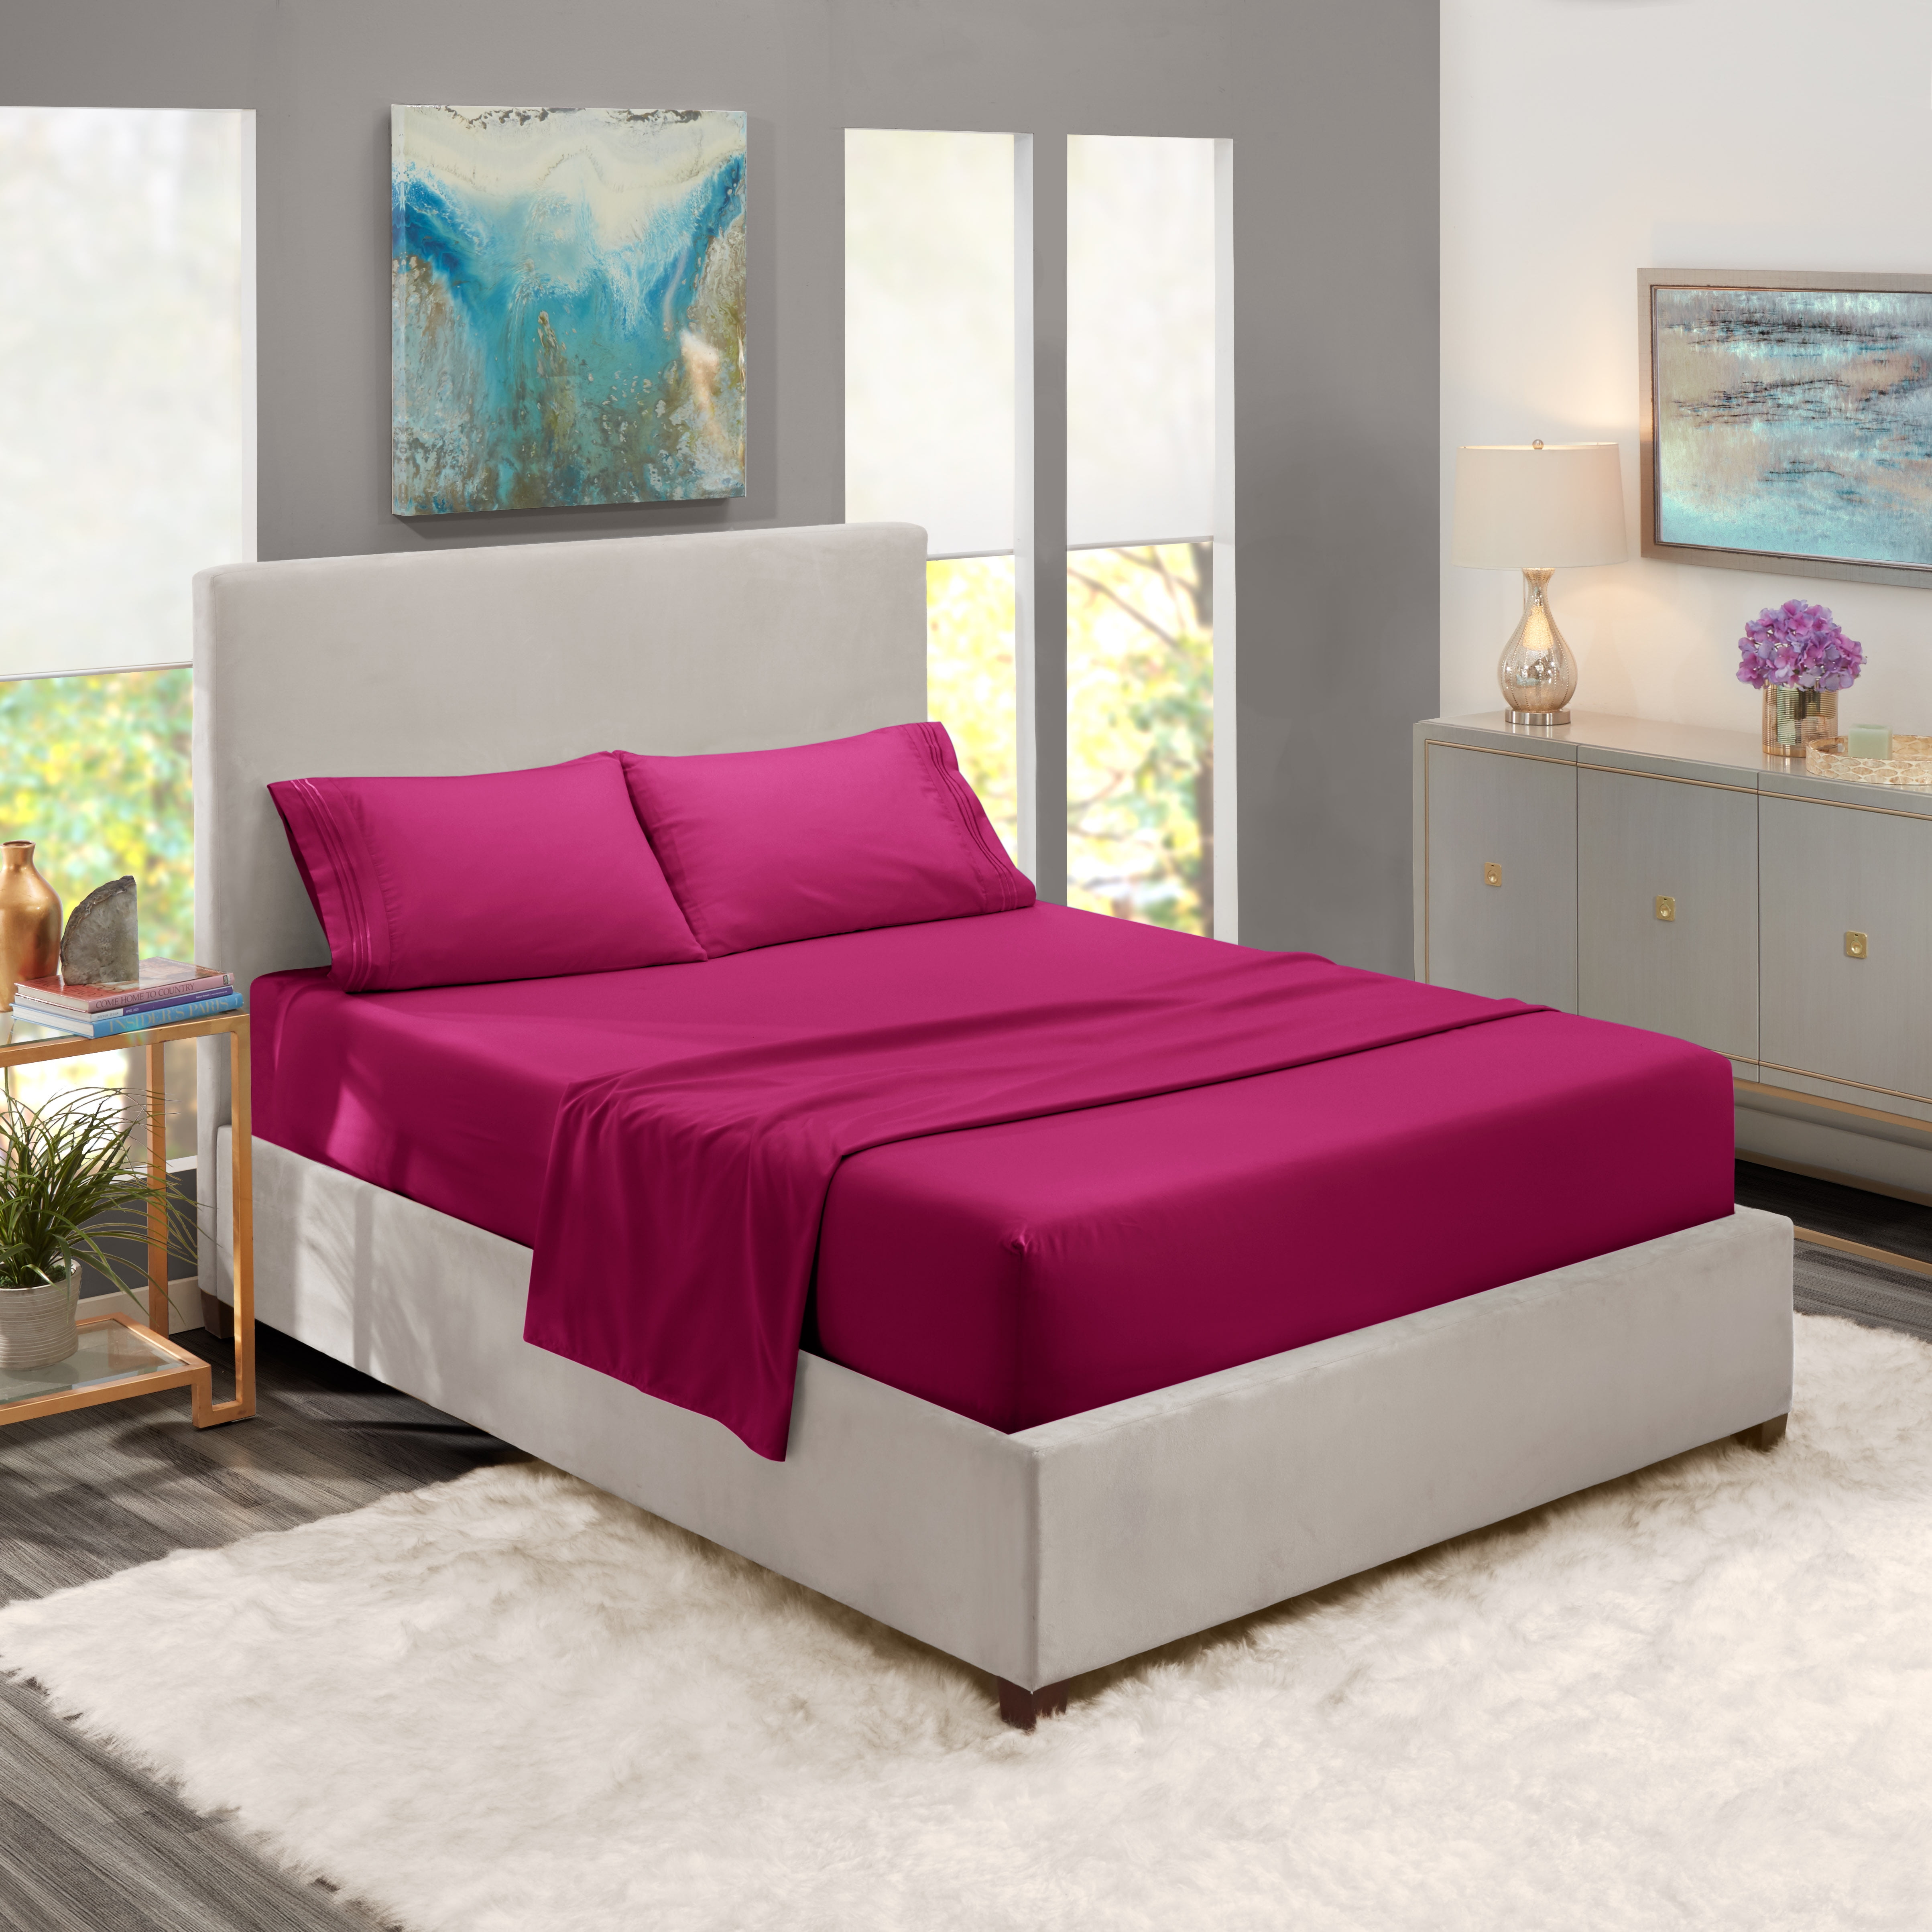 Cal King Size Bed Sheets Set Magenta, Luxury King Size Bed Linens